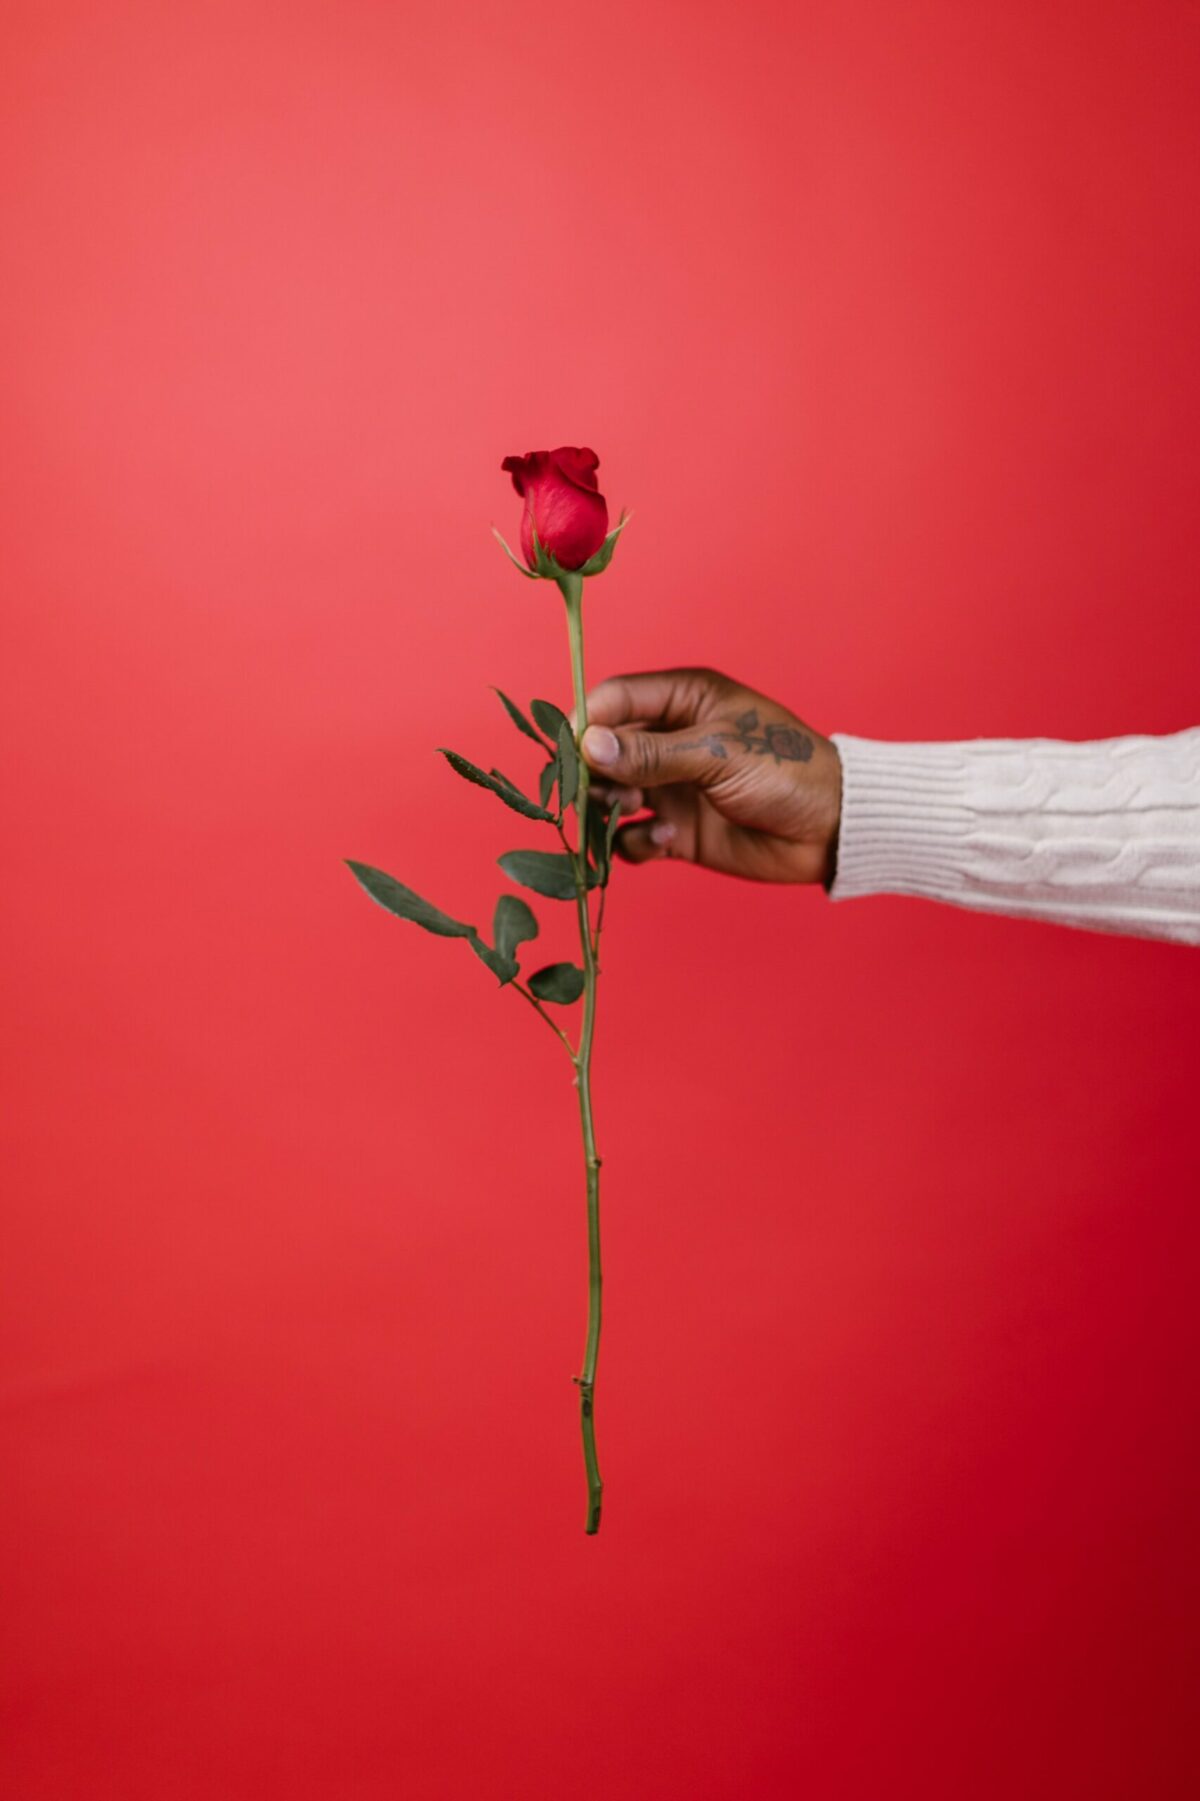 A single rose representing being single on Valentine's Day